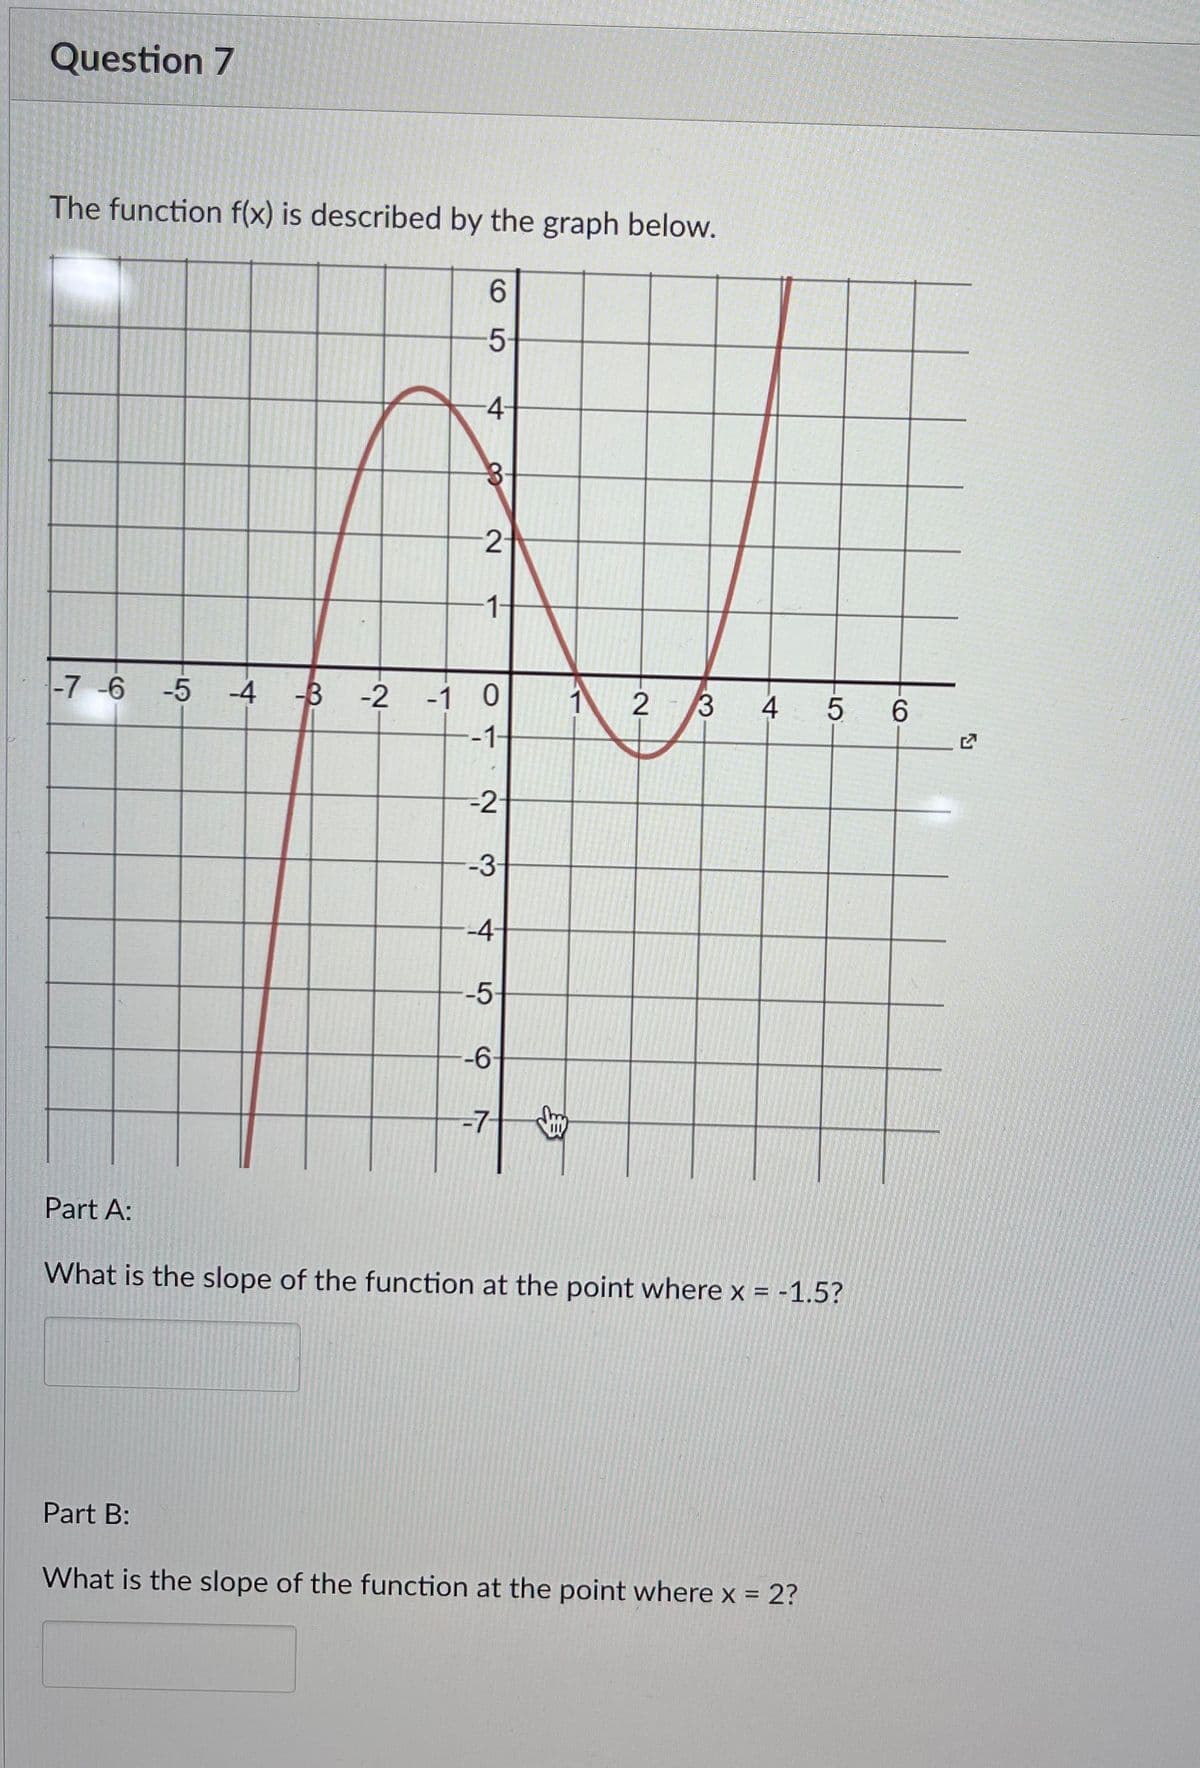 Question 7
The function f(x) is described by the graph below.
6
5
-4-
2
-1-
-7 -6 -5 -4
-2 -1 0
5
-1-
-2-
--3-
--4-
--5-
--6-
-7-
Part A:
What is the slope of the function at the point where x = -1.5?
Part B:
What is the slope of the function at the point where x = 2?
-B
3O
1
2 3
4
6
S